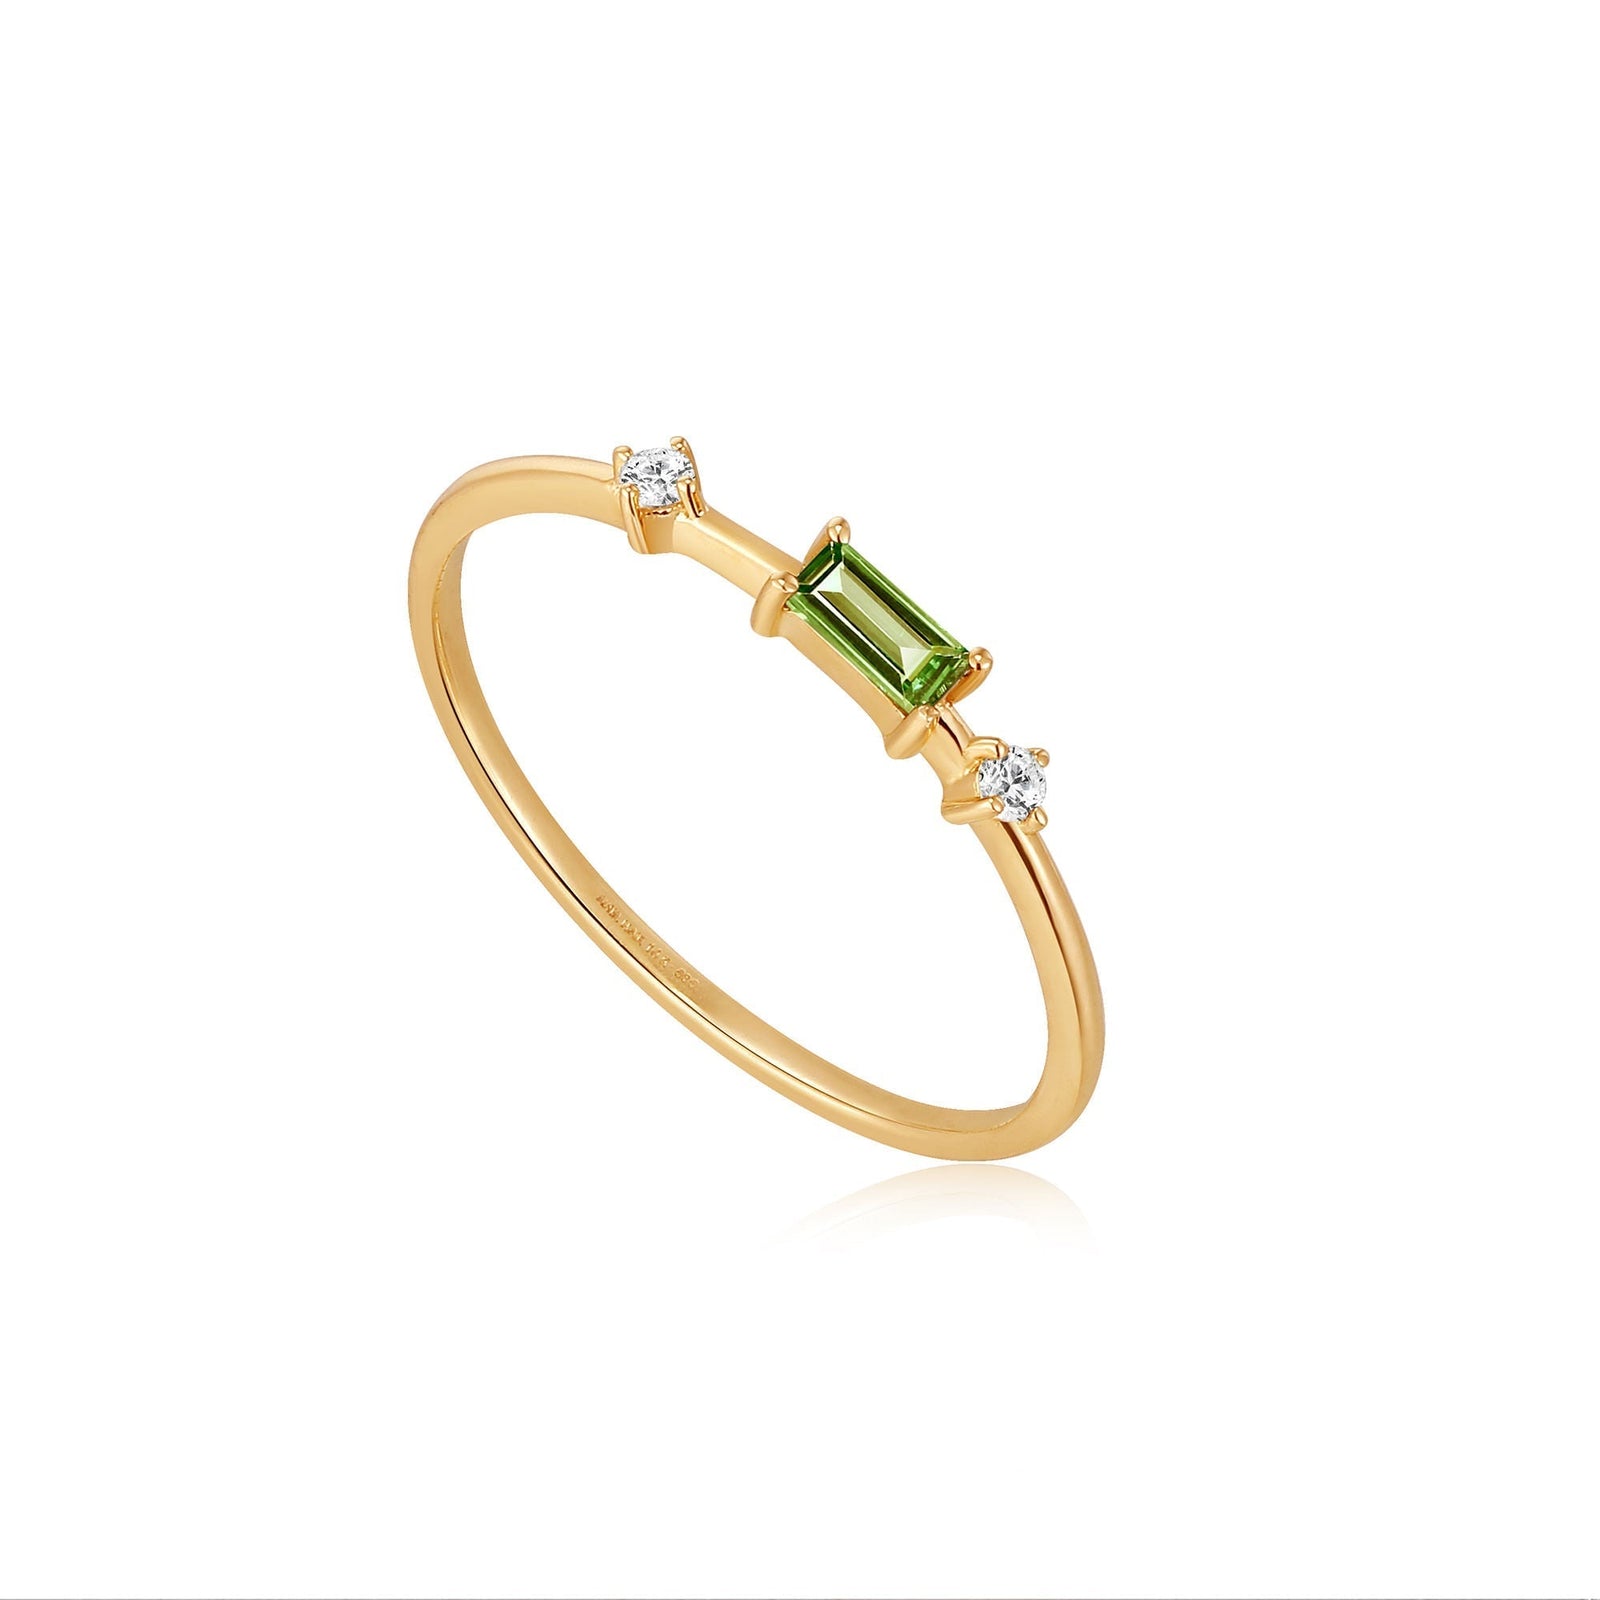 Ania Haie 14kt Gold Tourmaline and White Sapphire Ring